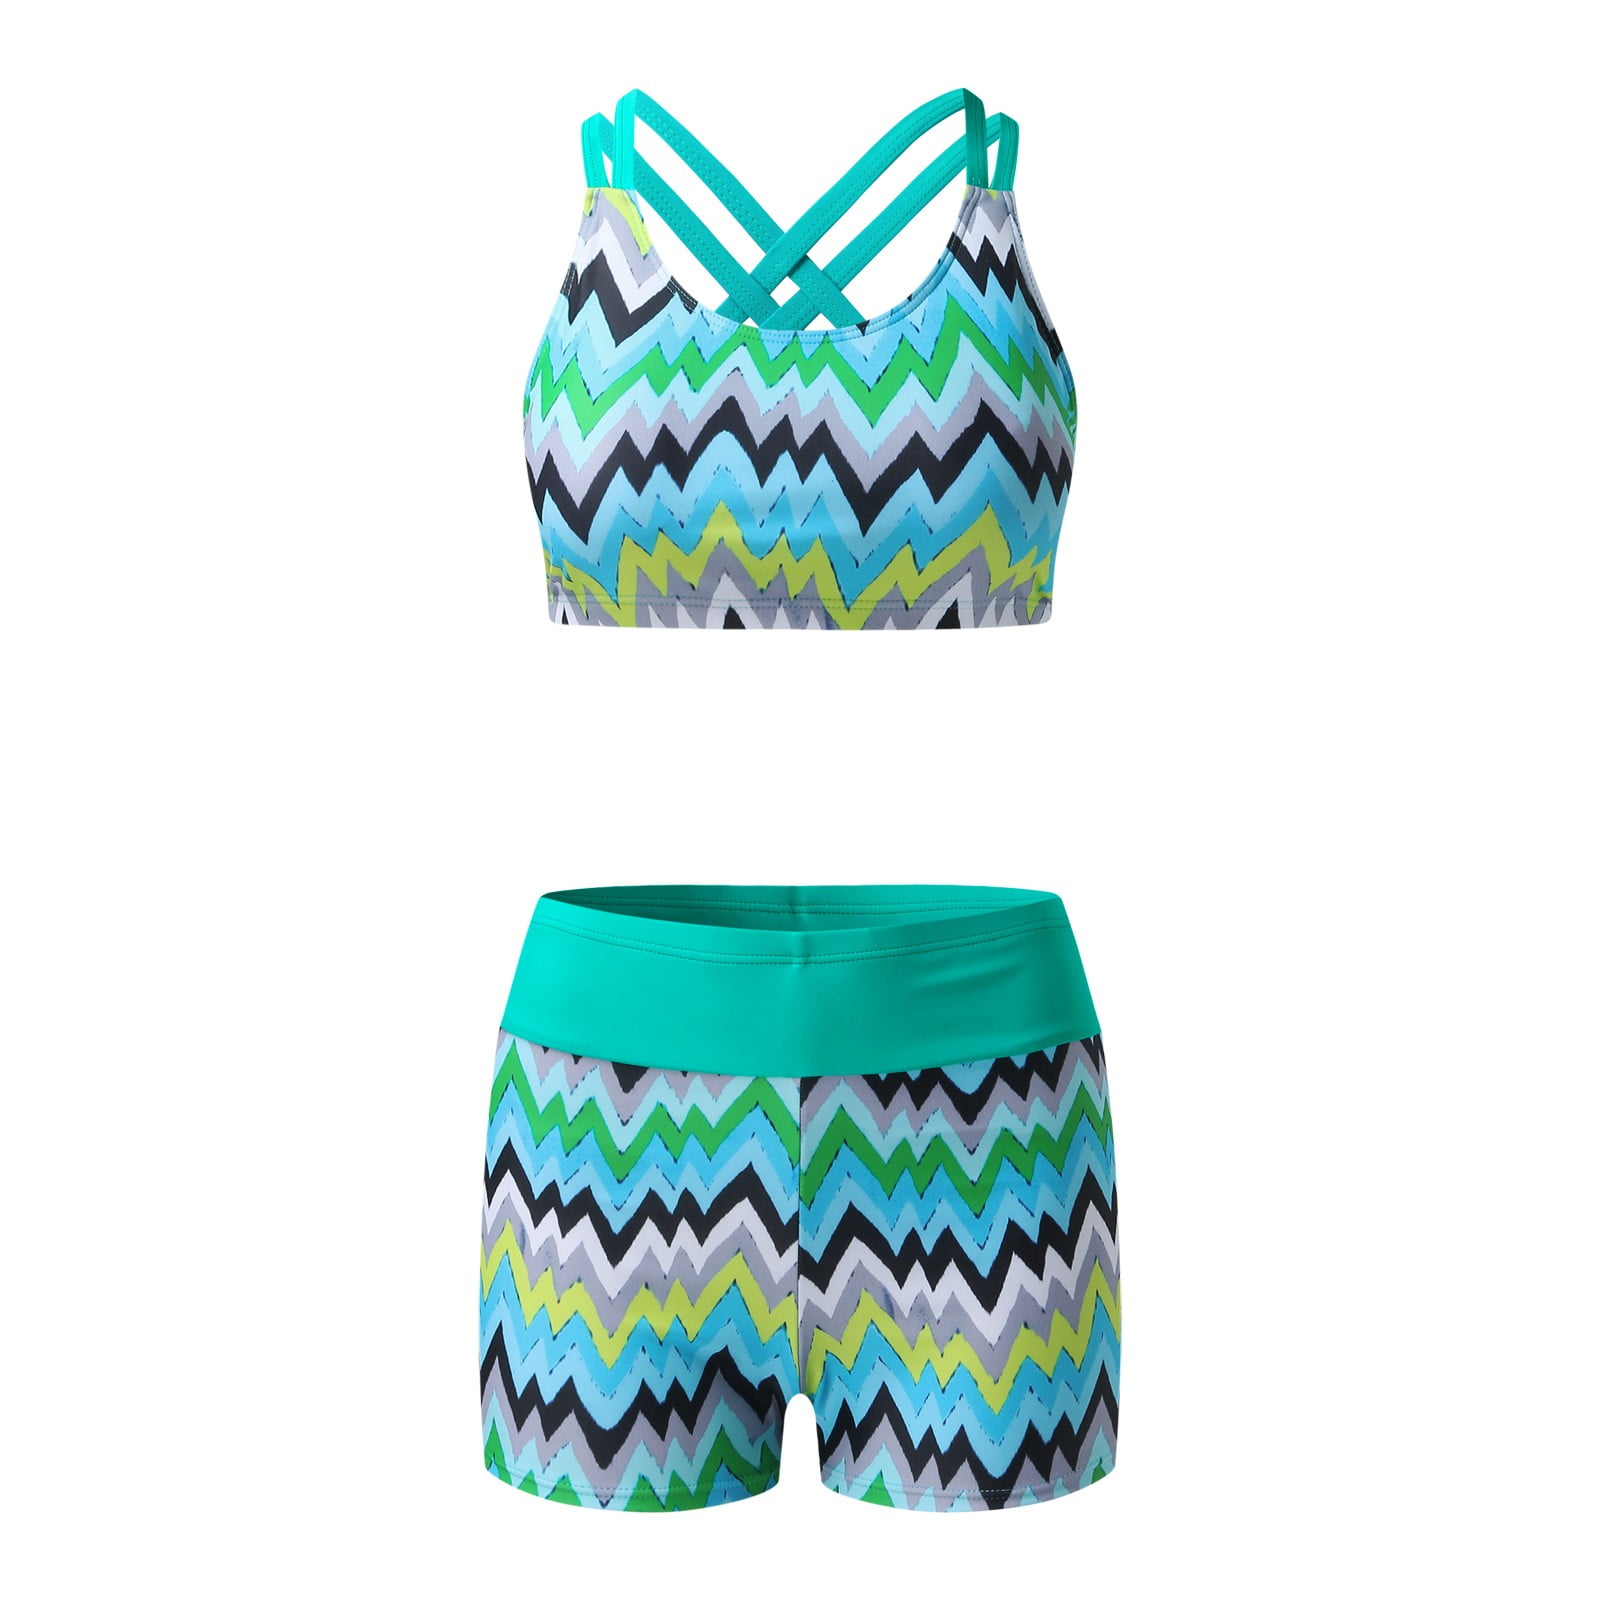 Cathalem Bathing Suit Tops for Women Support Women Swimsuits Printed 3  Piece Bathing Suits Swim Tank Top With Mesh Swimsuit Top Underwear Mint  Green